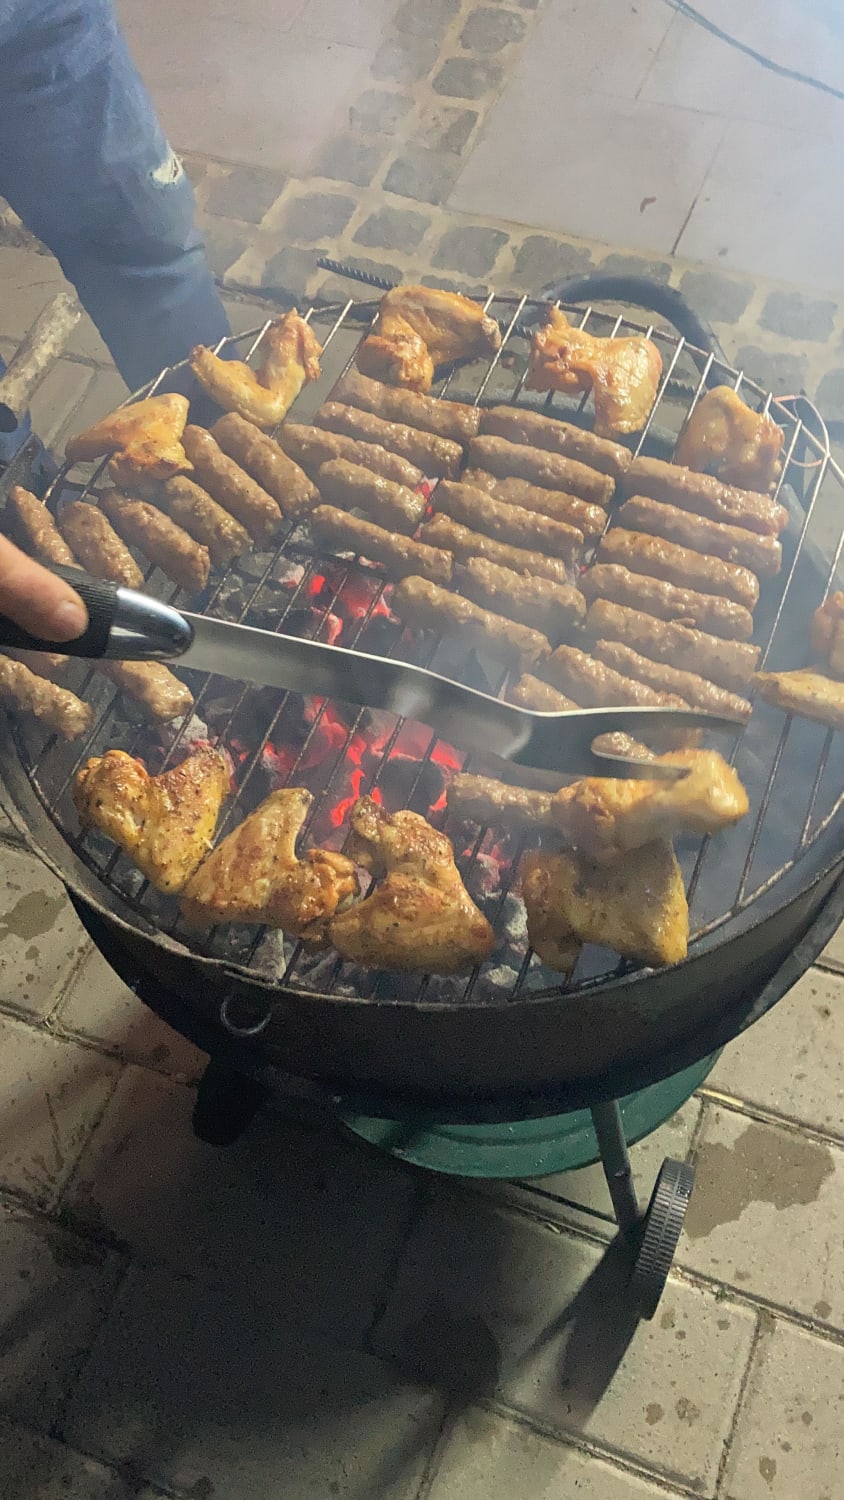 Grilled wings & ground beef sausages, Yugoslavian style!